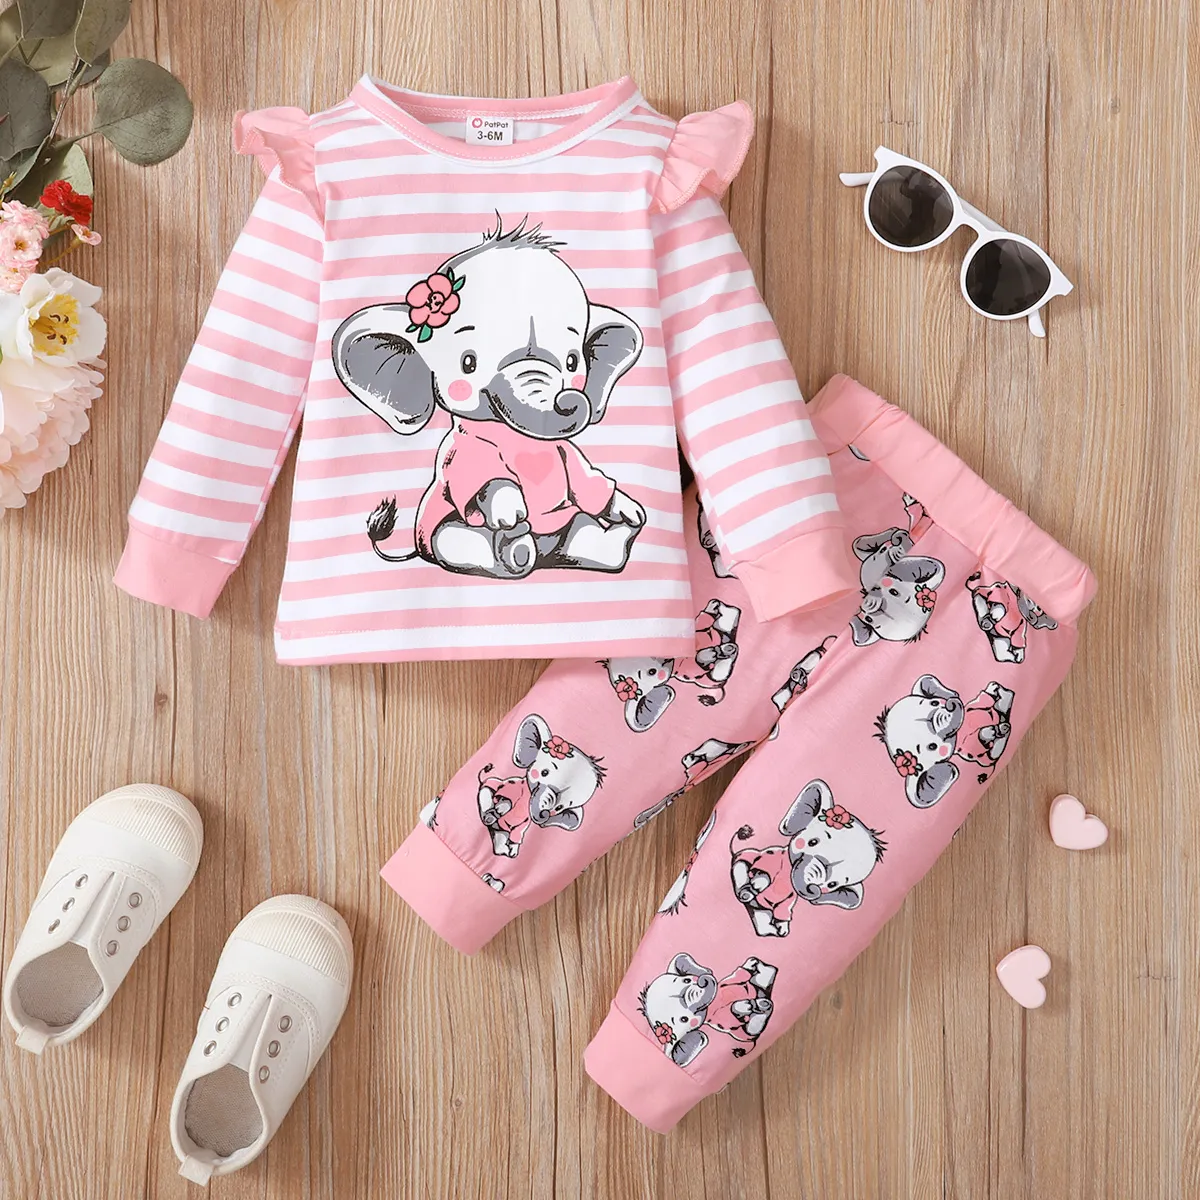 2pcs Baby Girl 95% Cotton Long-sleeve Cartoon Elephant Print Grey Striped Top and Trousers Set